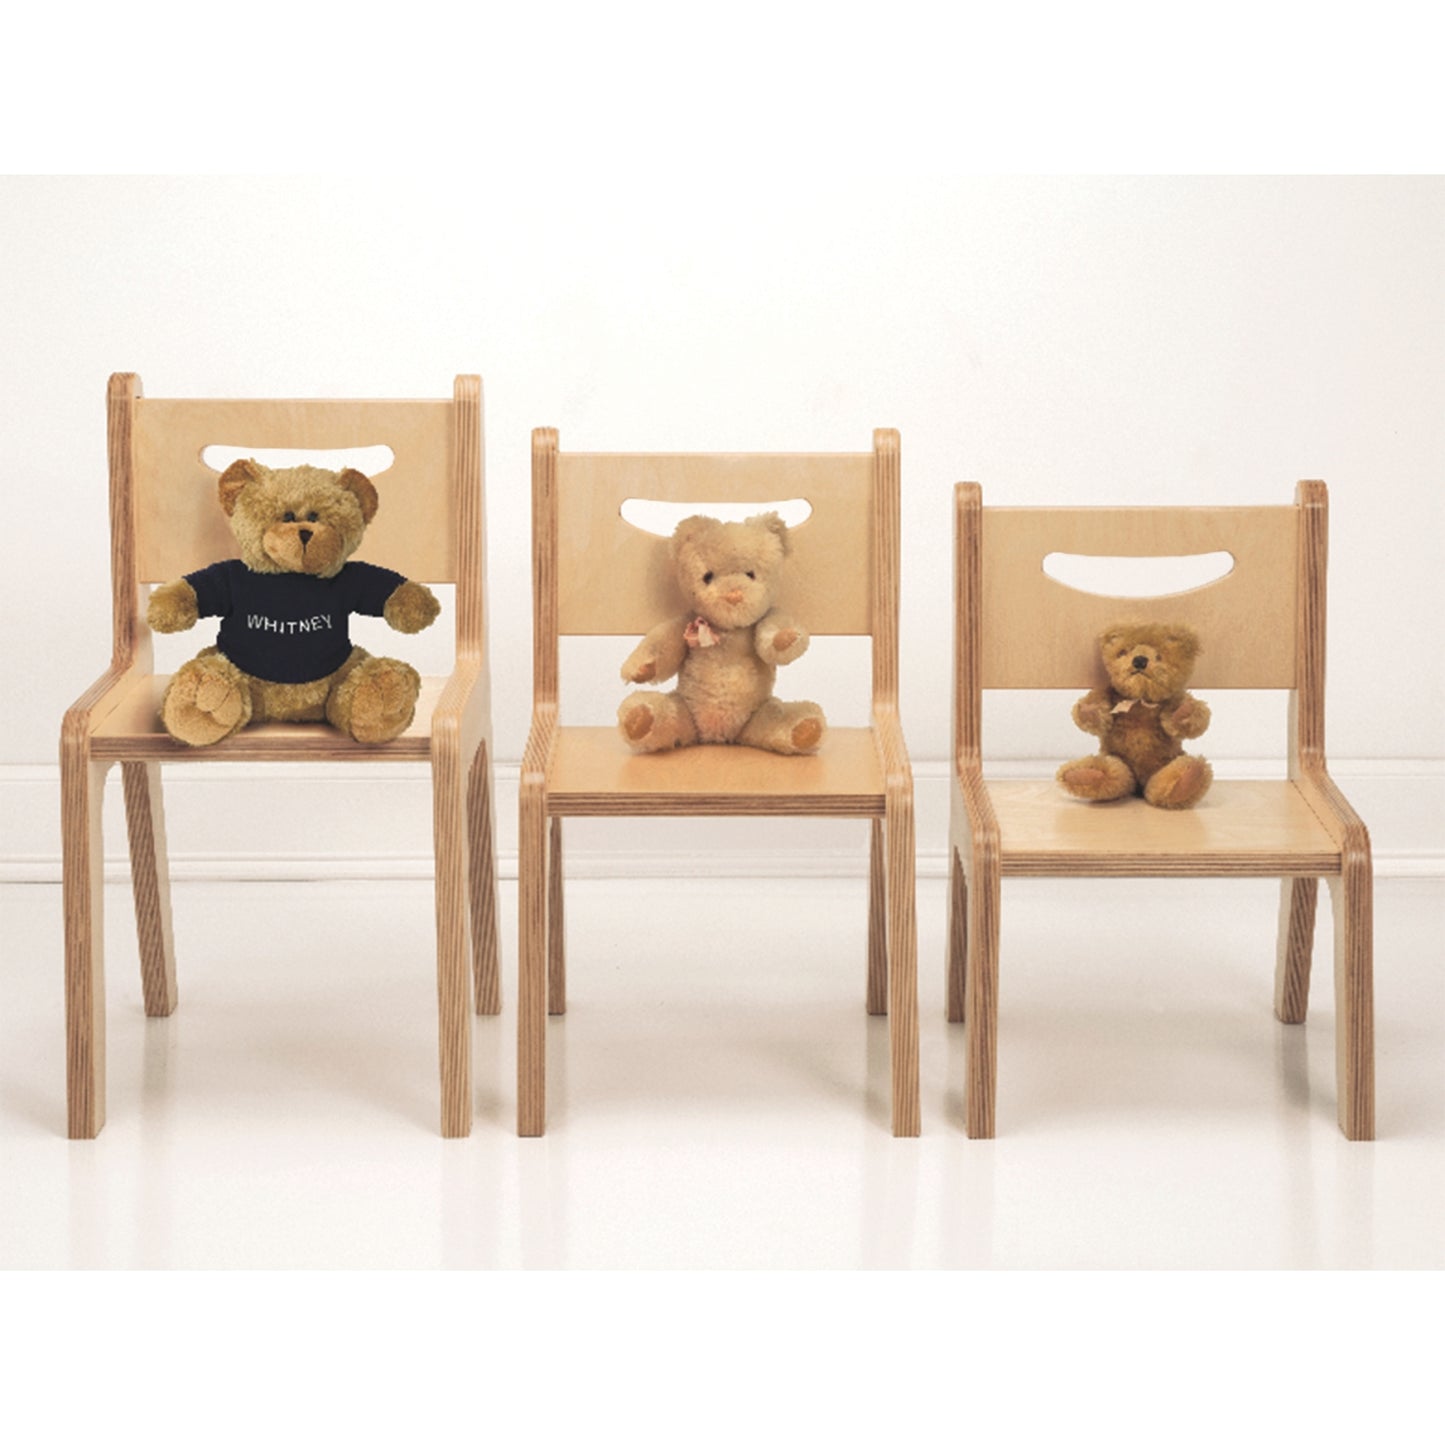 Whitney Plus 10" Natural Chair